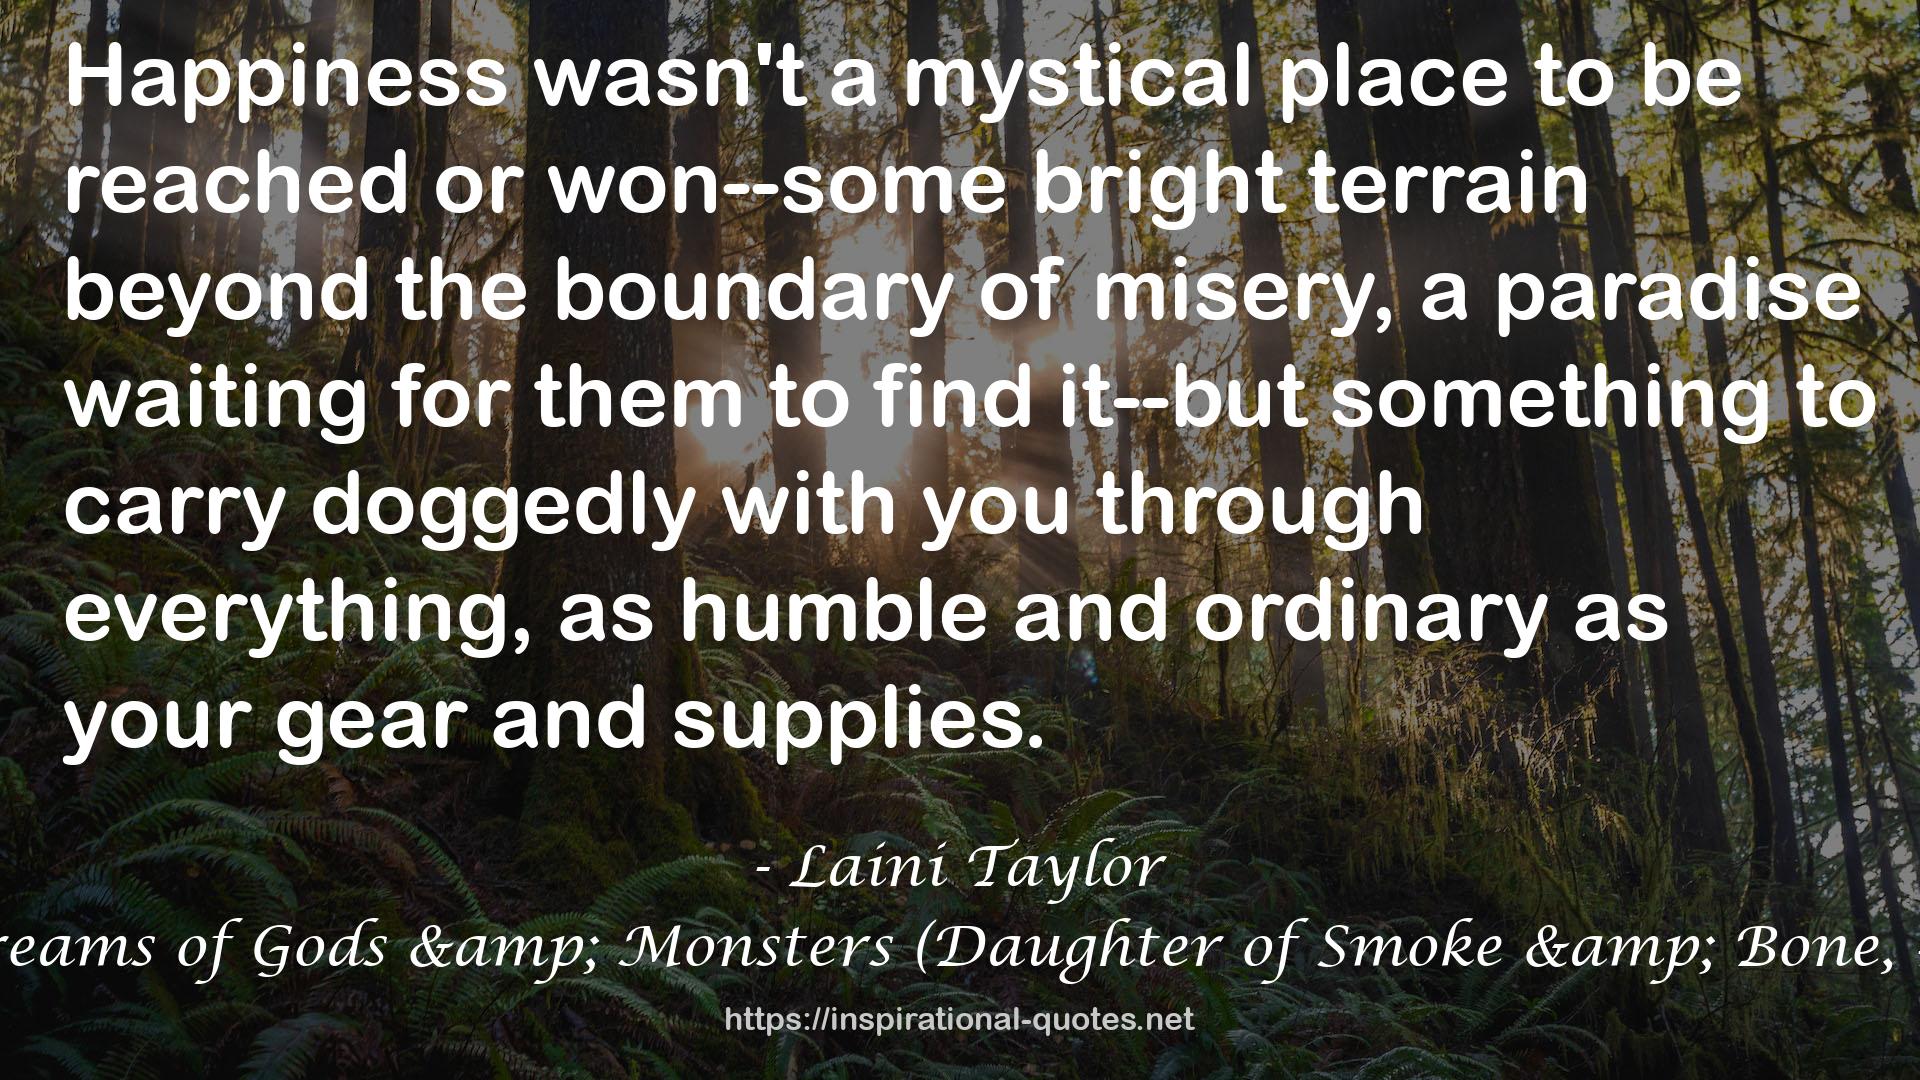 Dreams of Gods & Monsters (Daughter of Smoke & Bone, #3) QUOTES